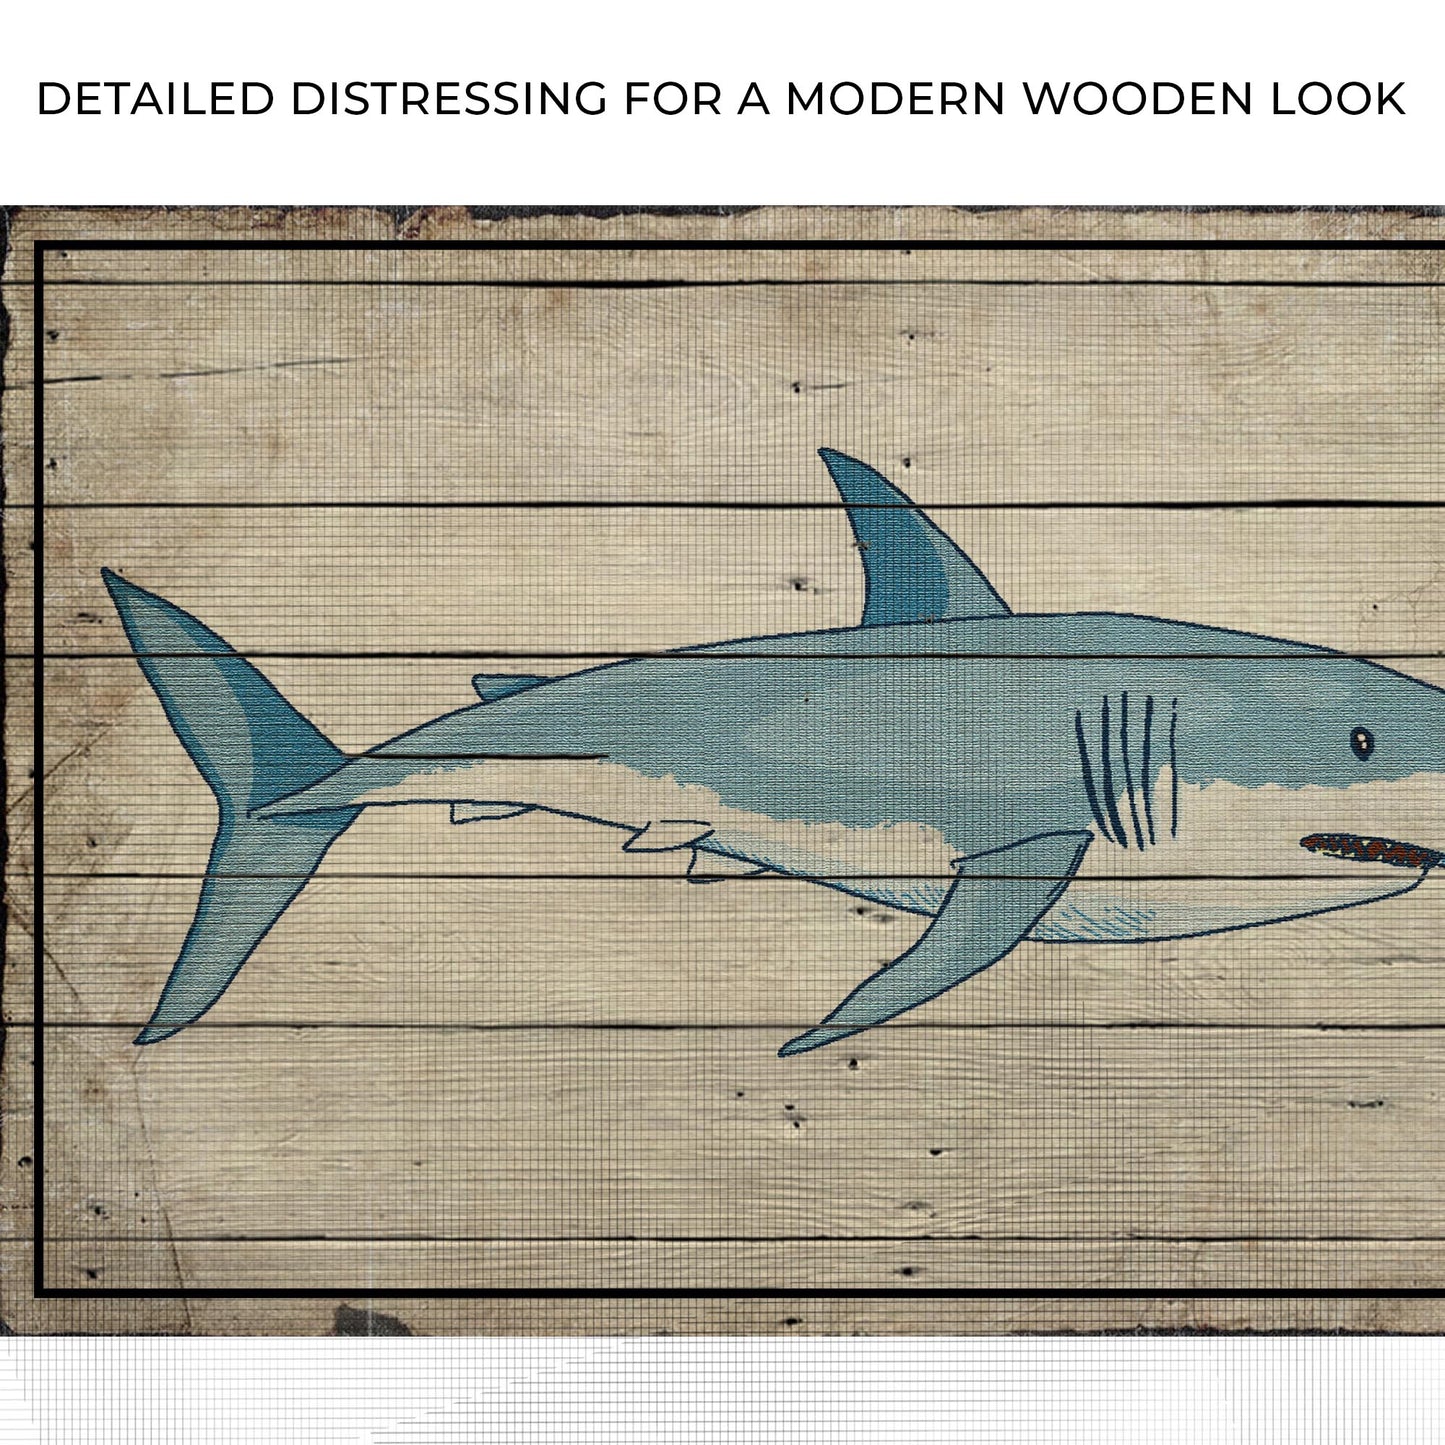 Grey Reef Shark on Wood Canvas Wall Art Zoom - Image by Tailored Canvases